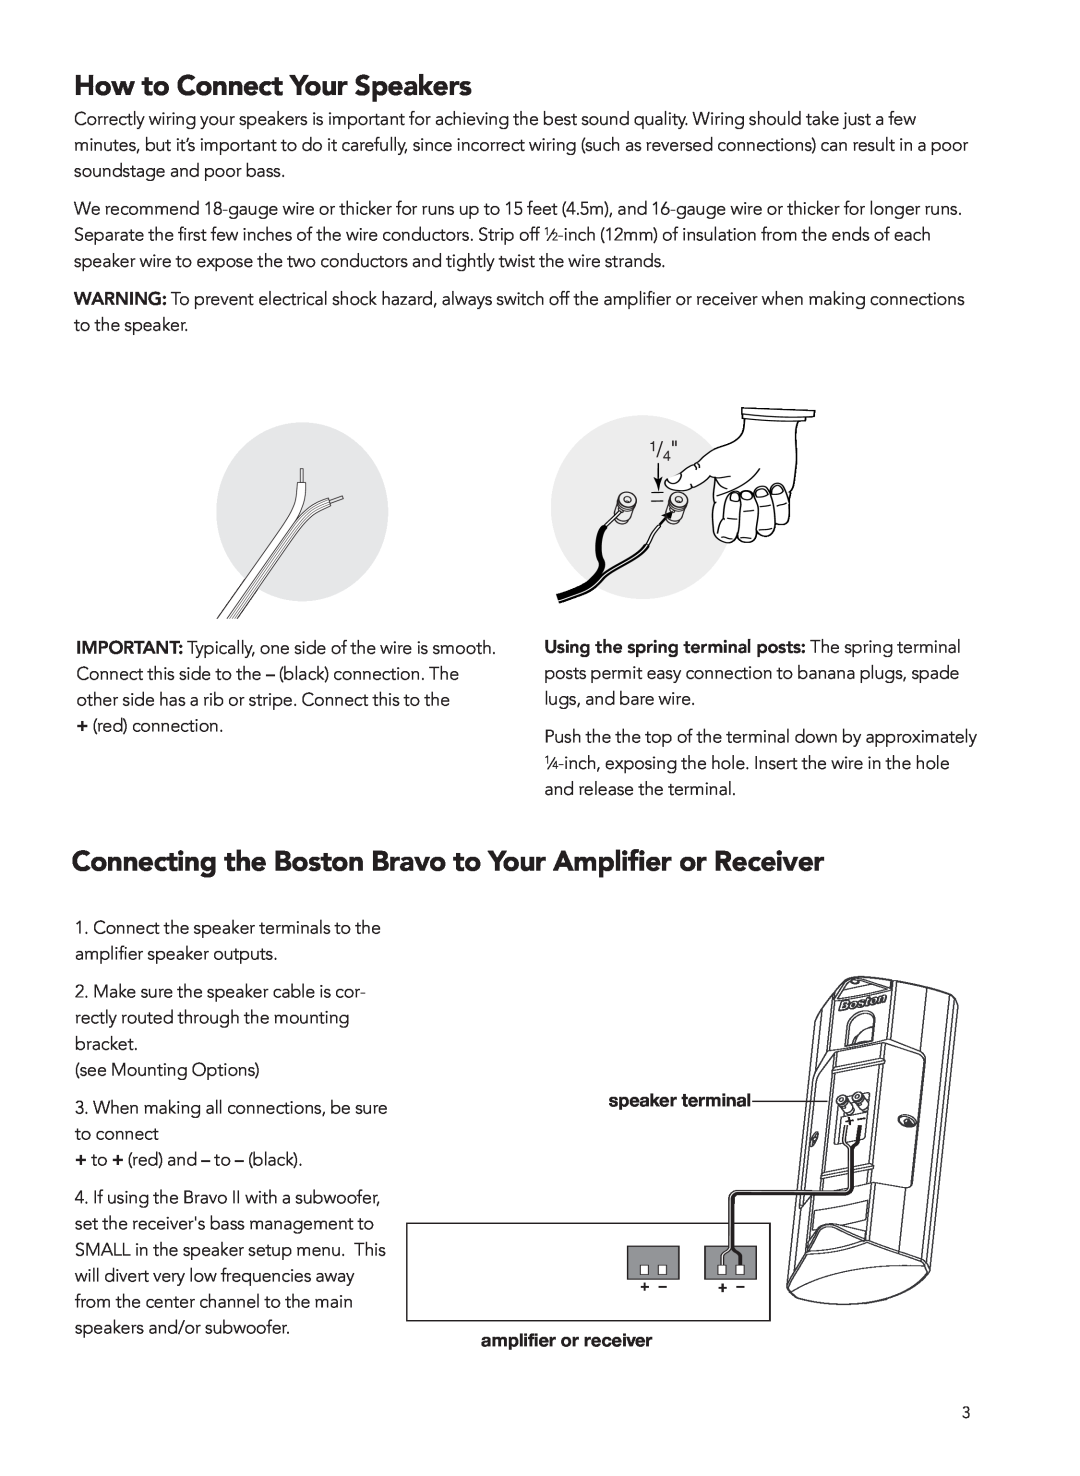 Boston Acoustics 2 manual How to Connect Your Speakers, speaker terminal amplifier or receiver 